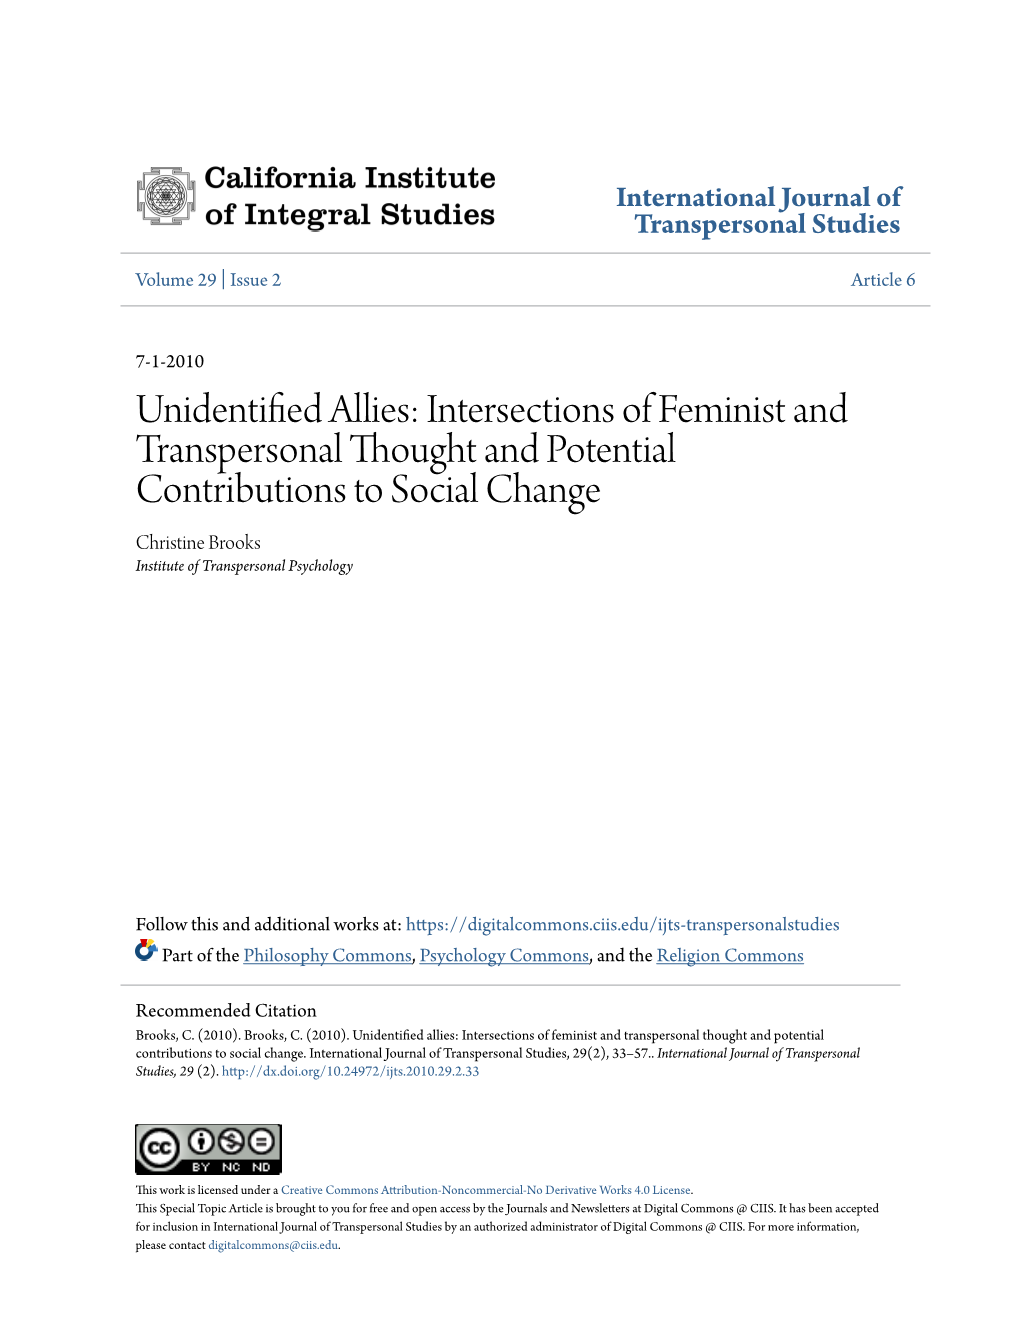 Unidentified Allies: Intersections of Feminist and Transpersonal